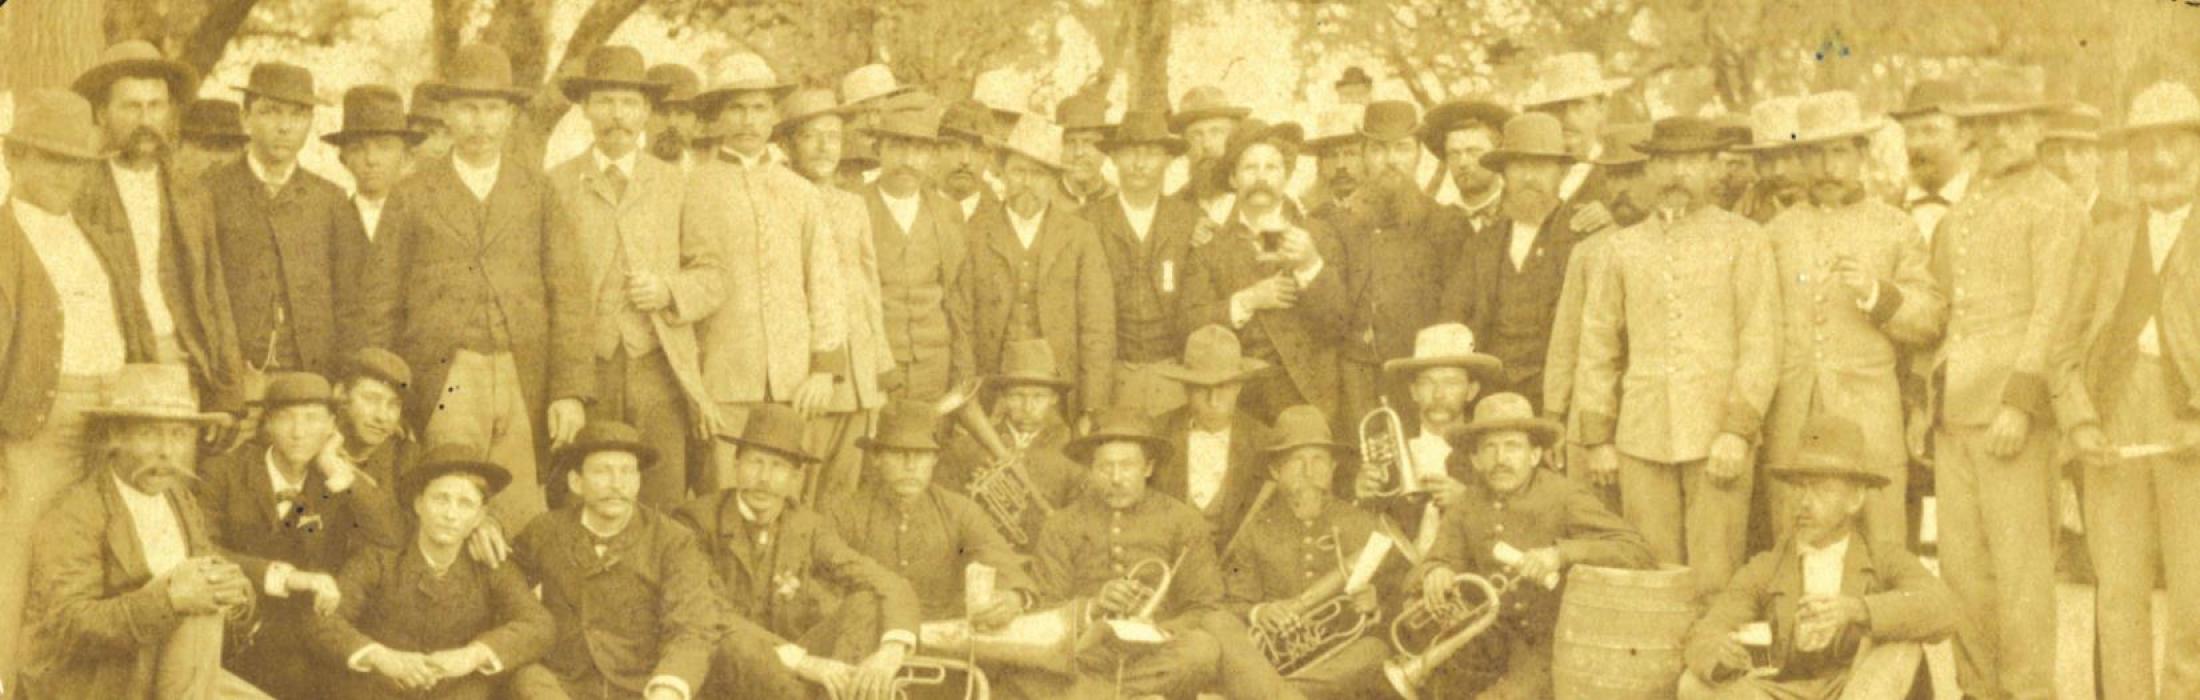 Members of the Bluff Schuetzenverein, a German Texas shooting club and social organization, pose for a photo at one of their many events in the late 1870s or early 1880s.